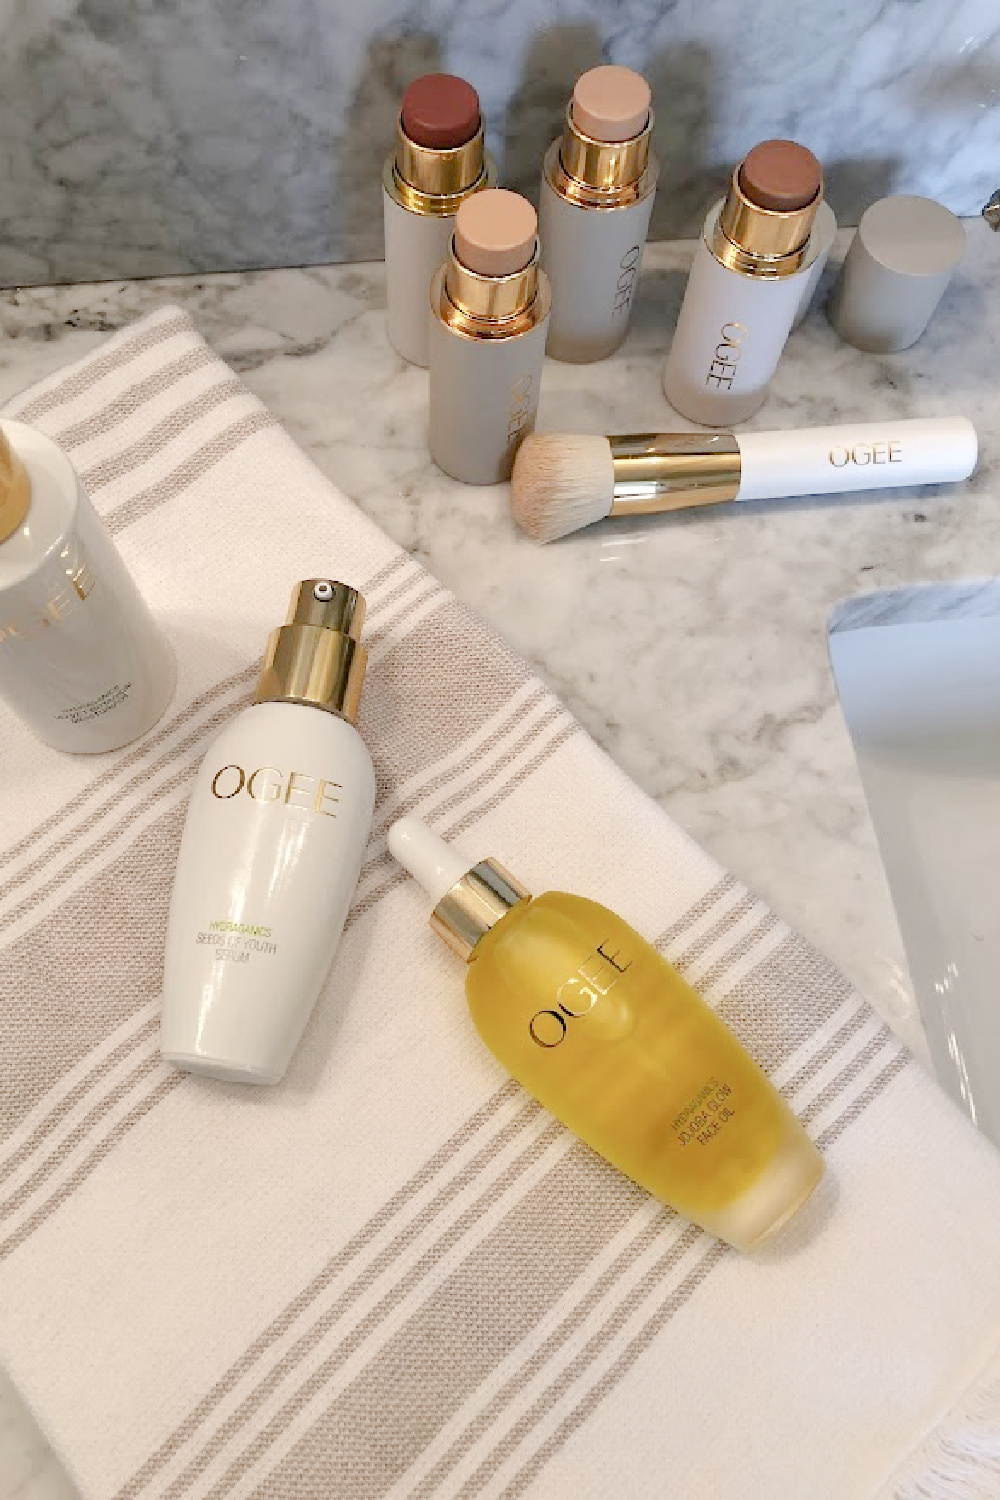 OGEE's organic glow trio potions, complexion sticks, face sticks, and blender brush on my vanity - Hello Lovely Studio. #organicmakeup #cleanmakeup #ogee